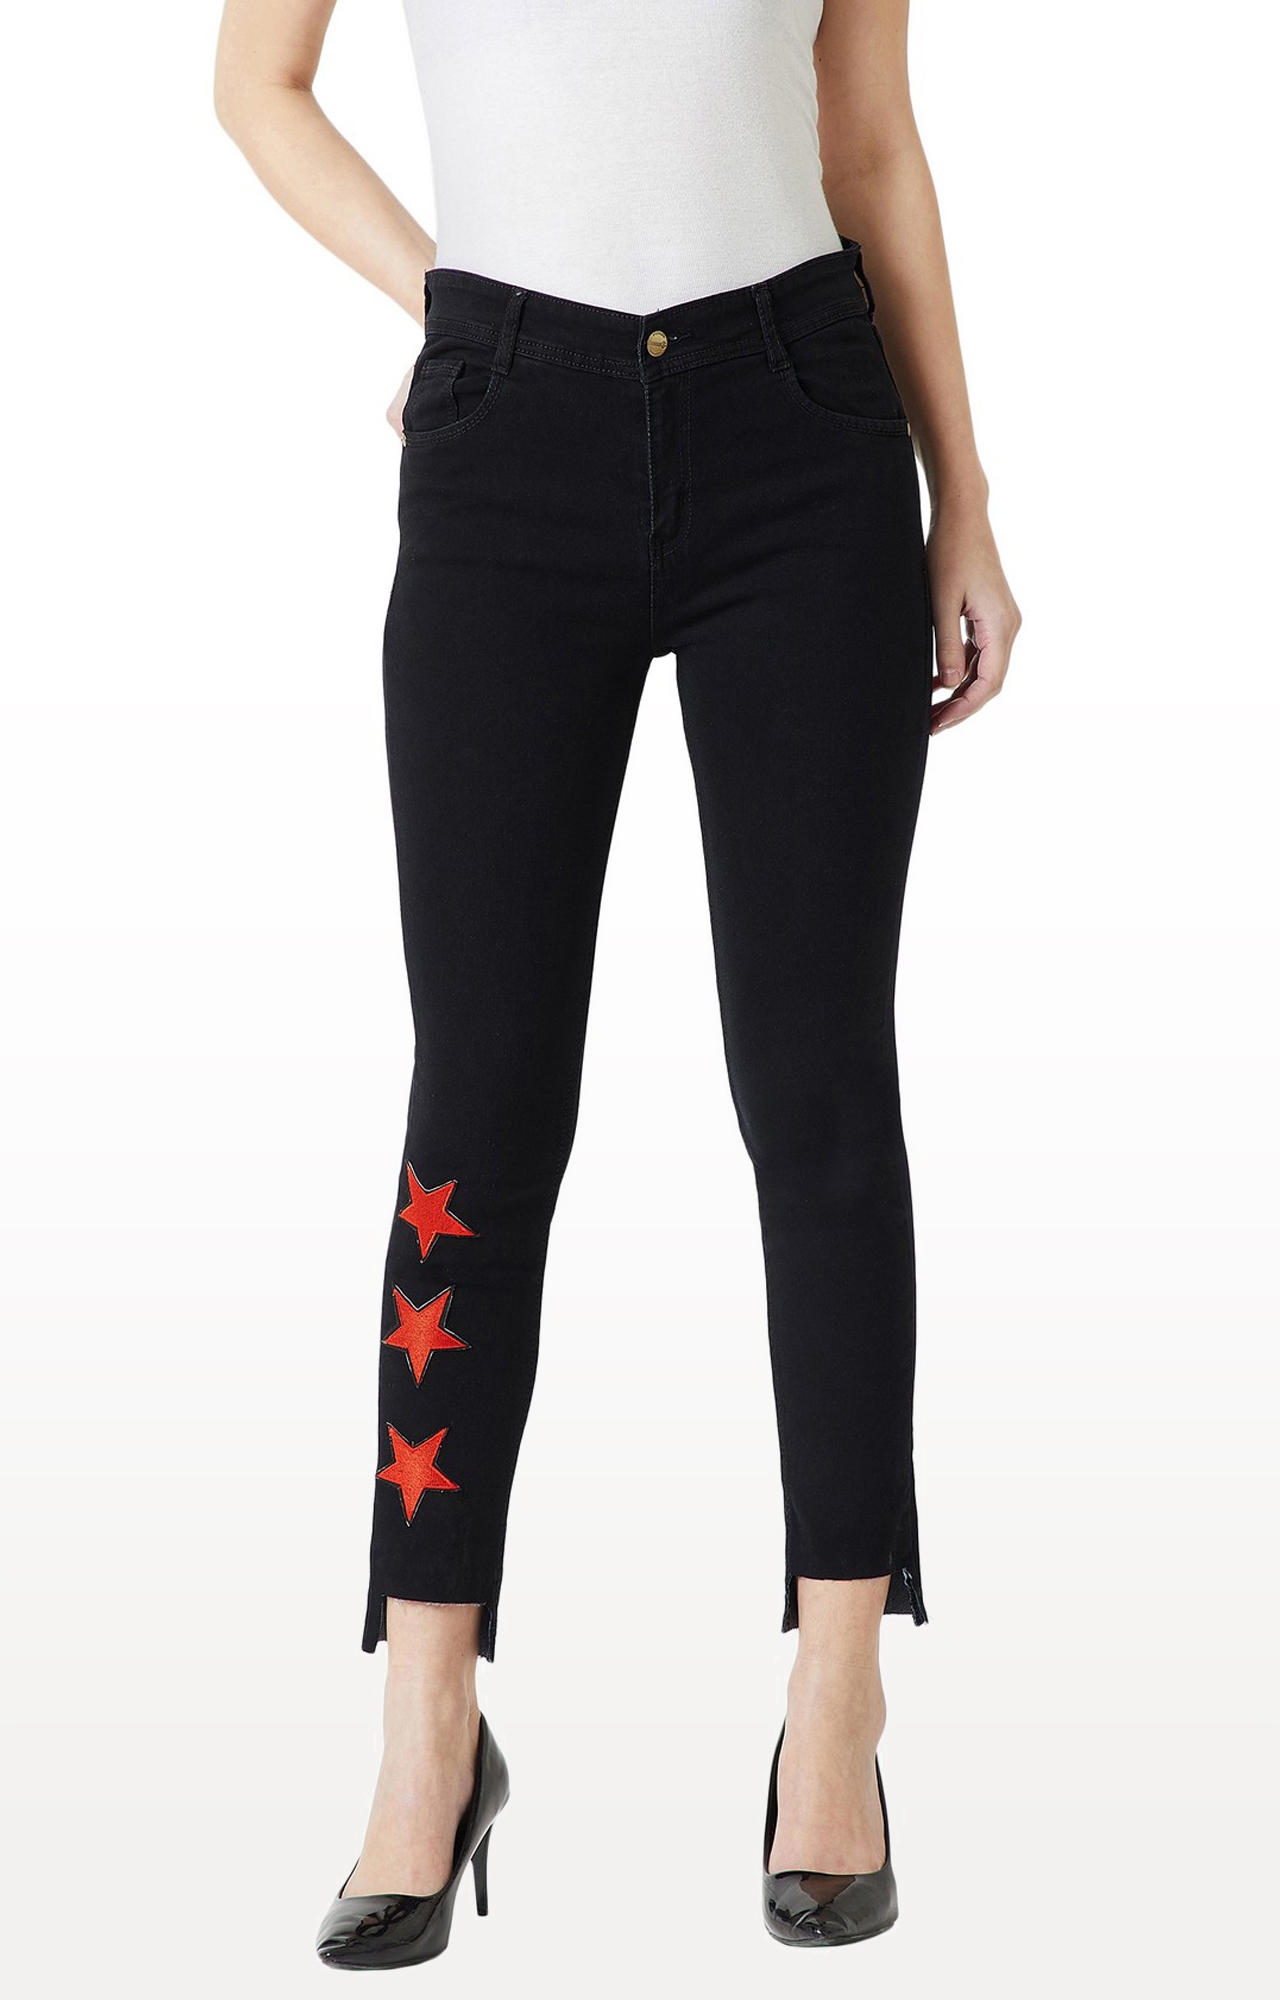 MISS CHASE | Black Solid Tapered Jeans